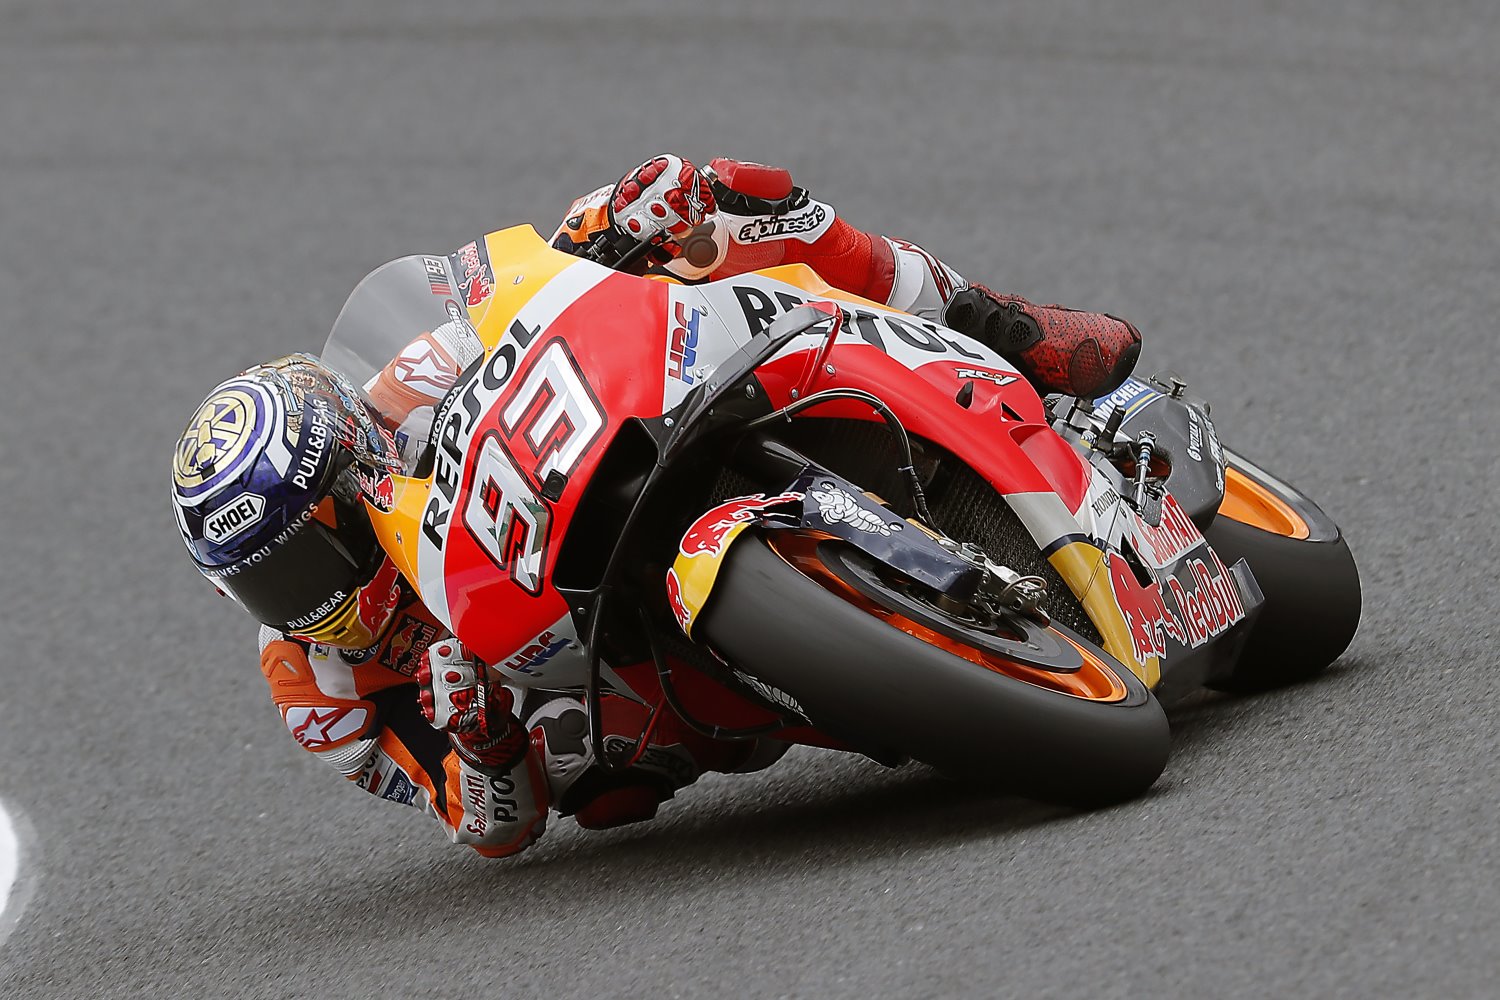 Marquez will have to overcome Ducati's HP advantage with his skill on Sunday